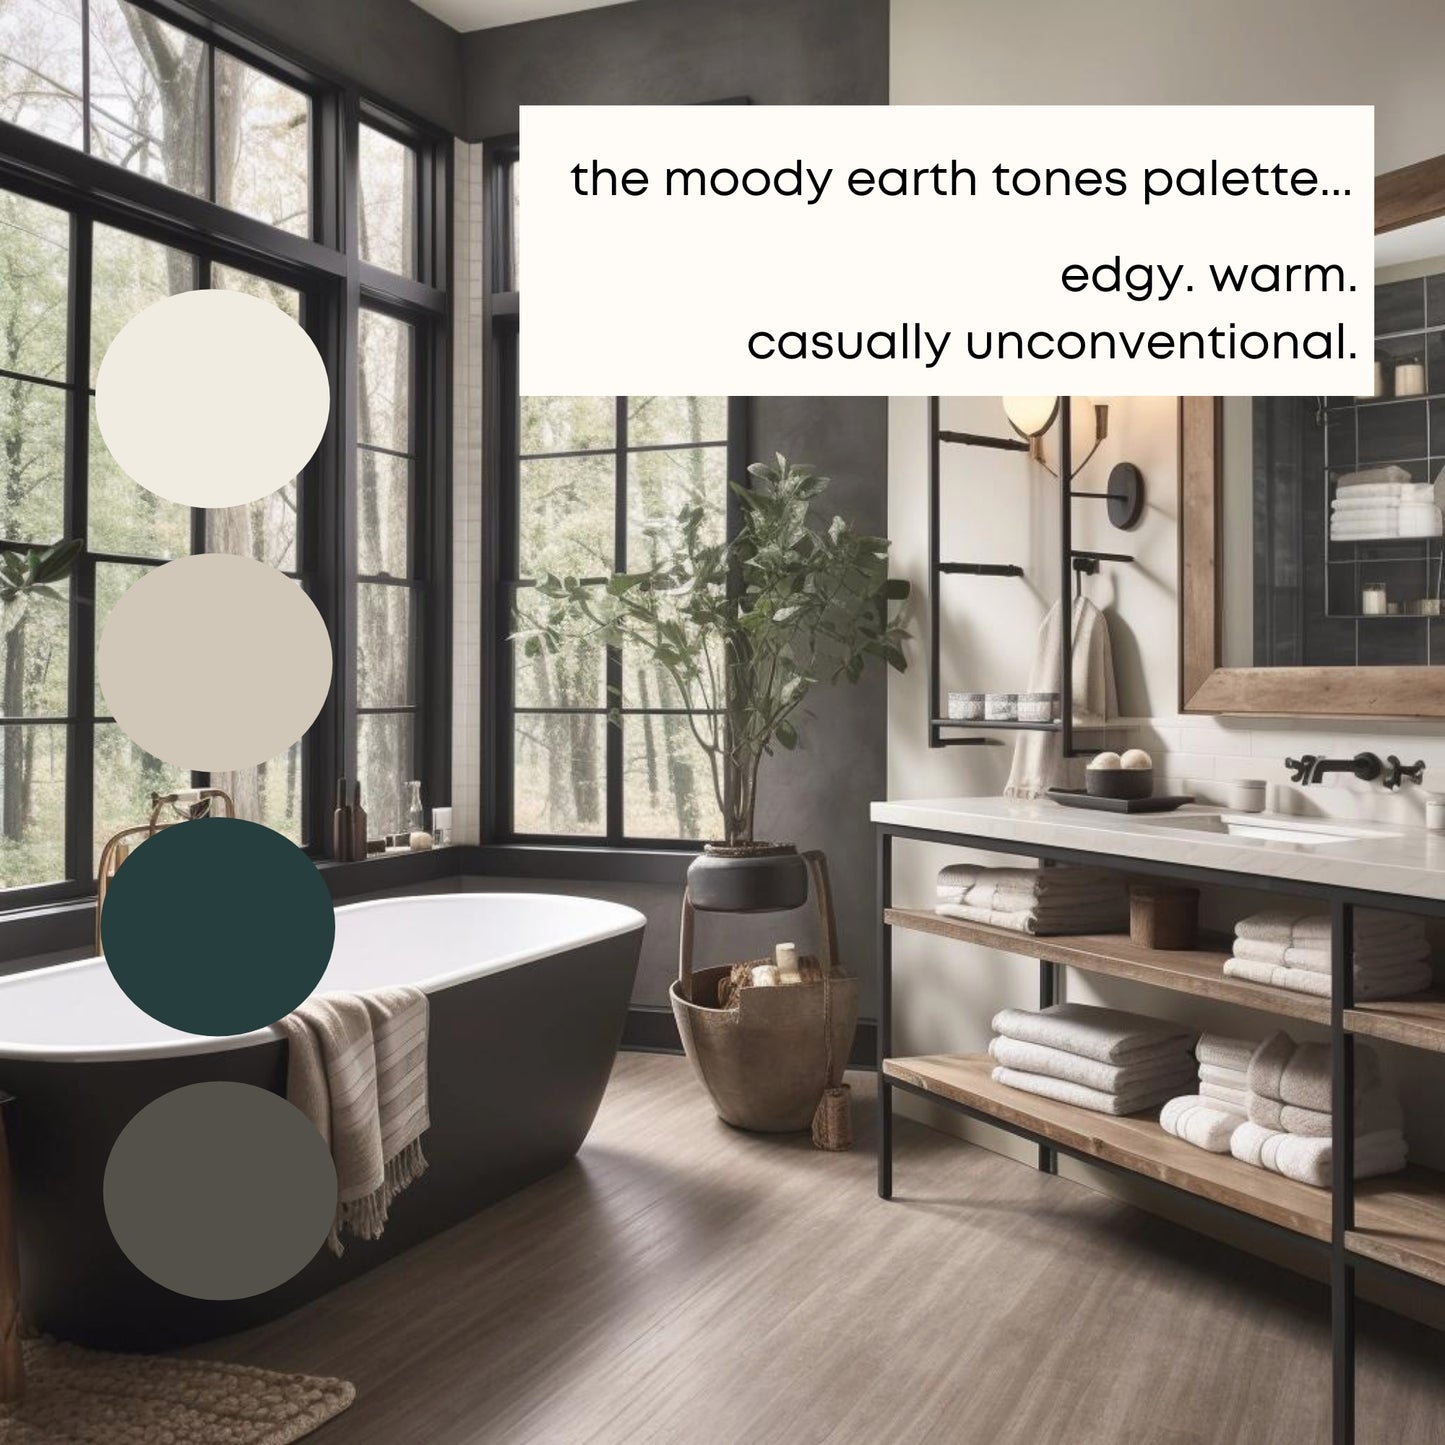 Moody Earth Tones, Sherwin Williams Paint Palette, Earthy Neutrals, Interior Paint Colors, Coordinating Interior Design, Color Palette, Accessible Beige